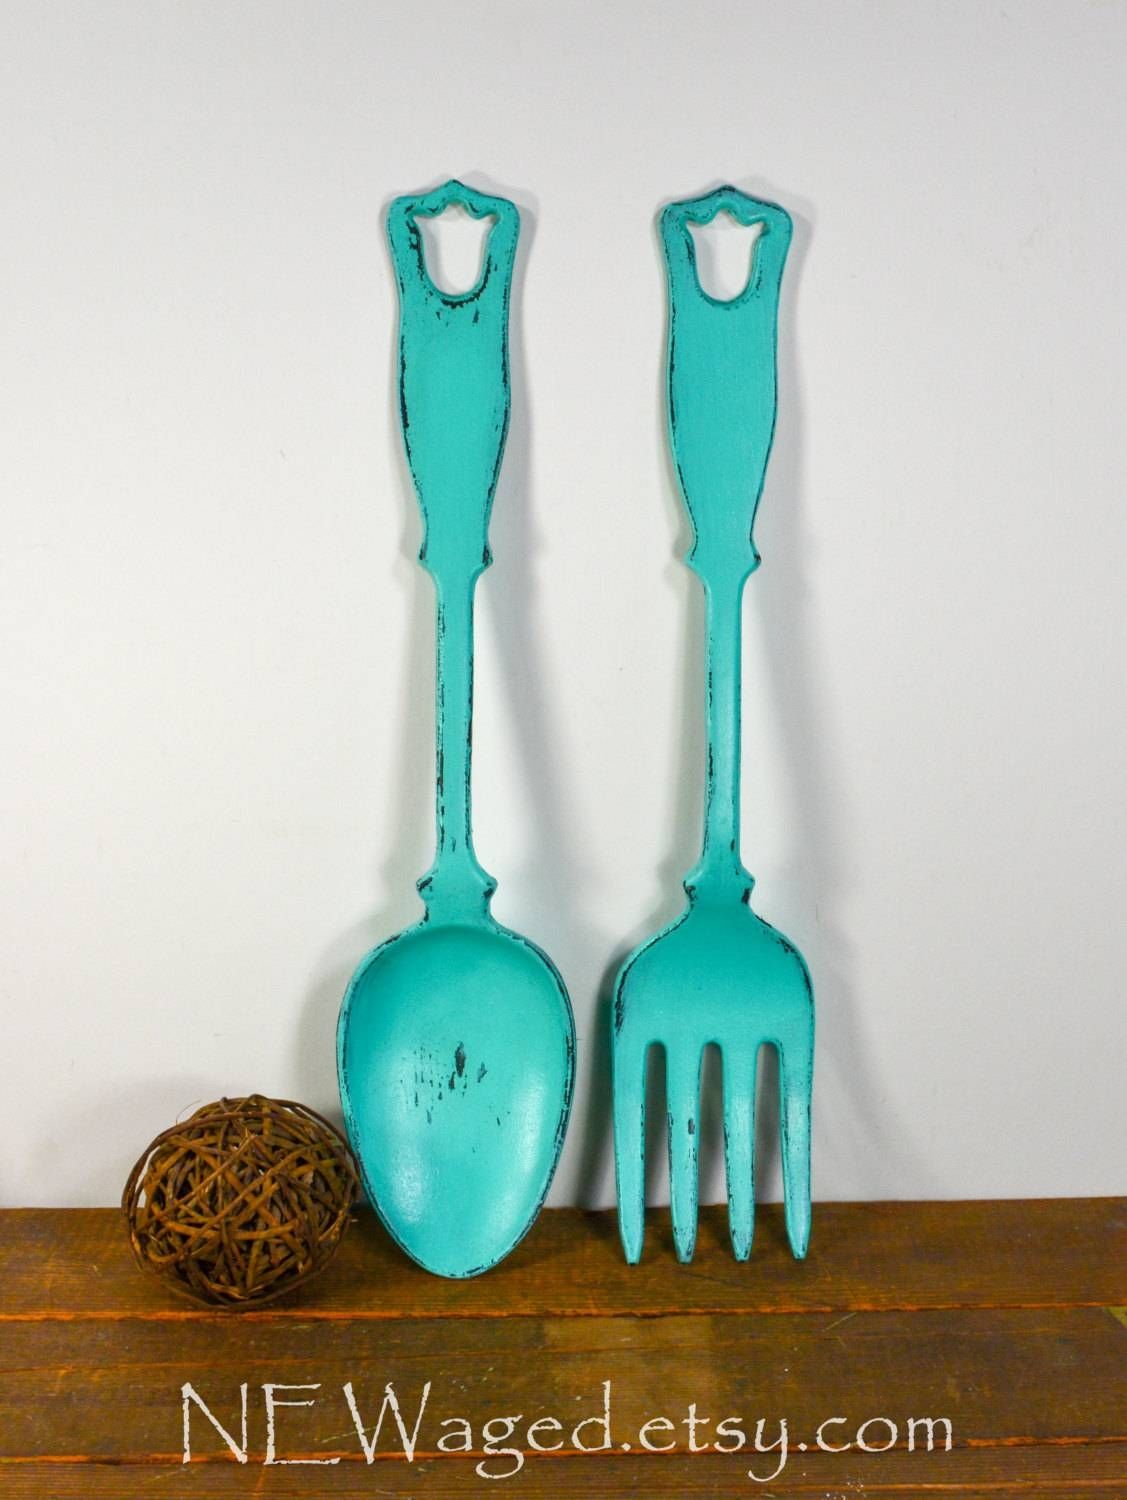 Oversized Spoon And Fork Wall Decor | Home Decor And Design Inside Newest Big Spoon And Fork Decors (View 24 of 25)